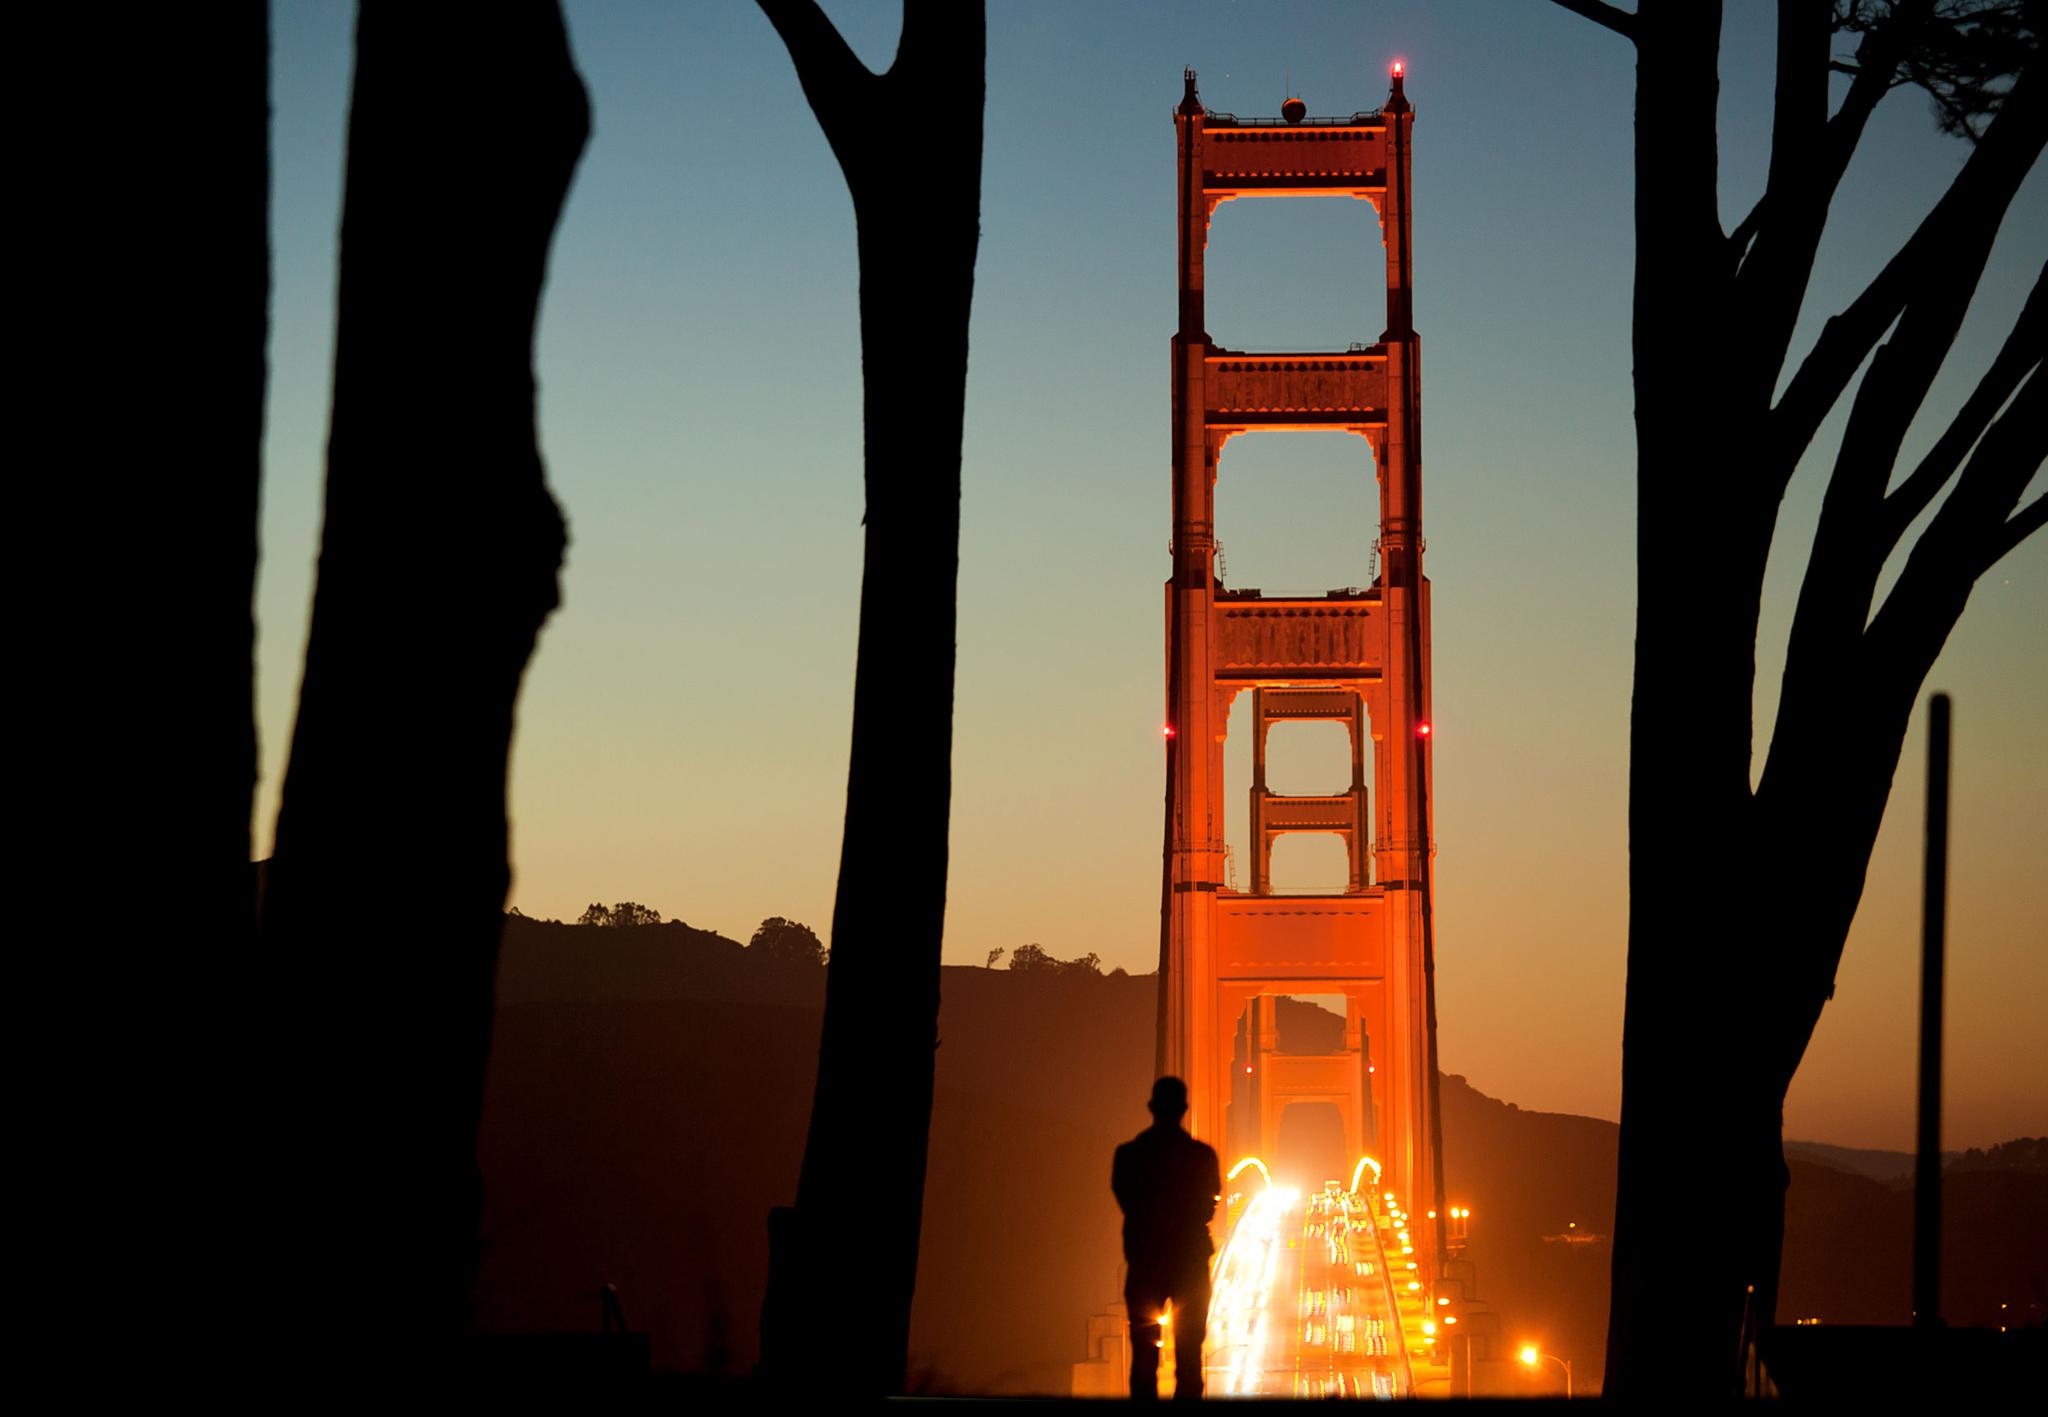 A man watching the sunset at the Golden Gate Overlook. Photo by Scott Sawyer.